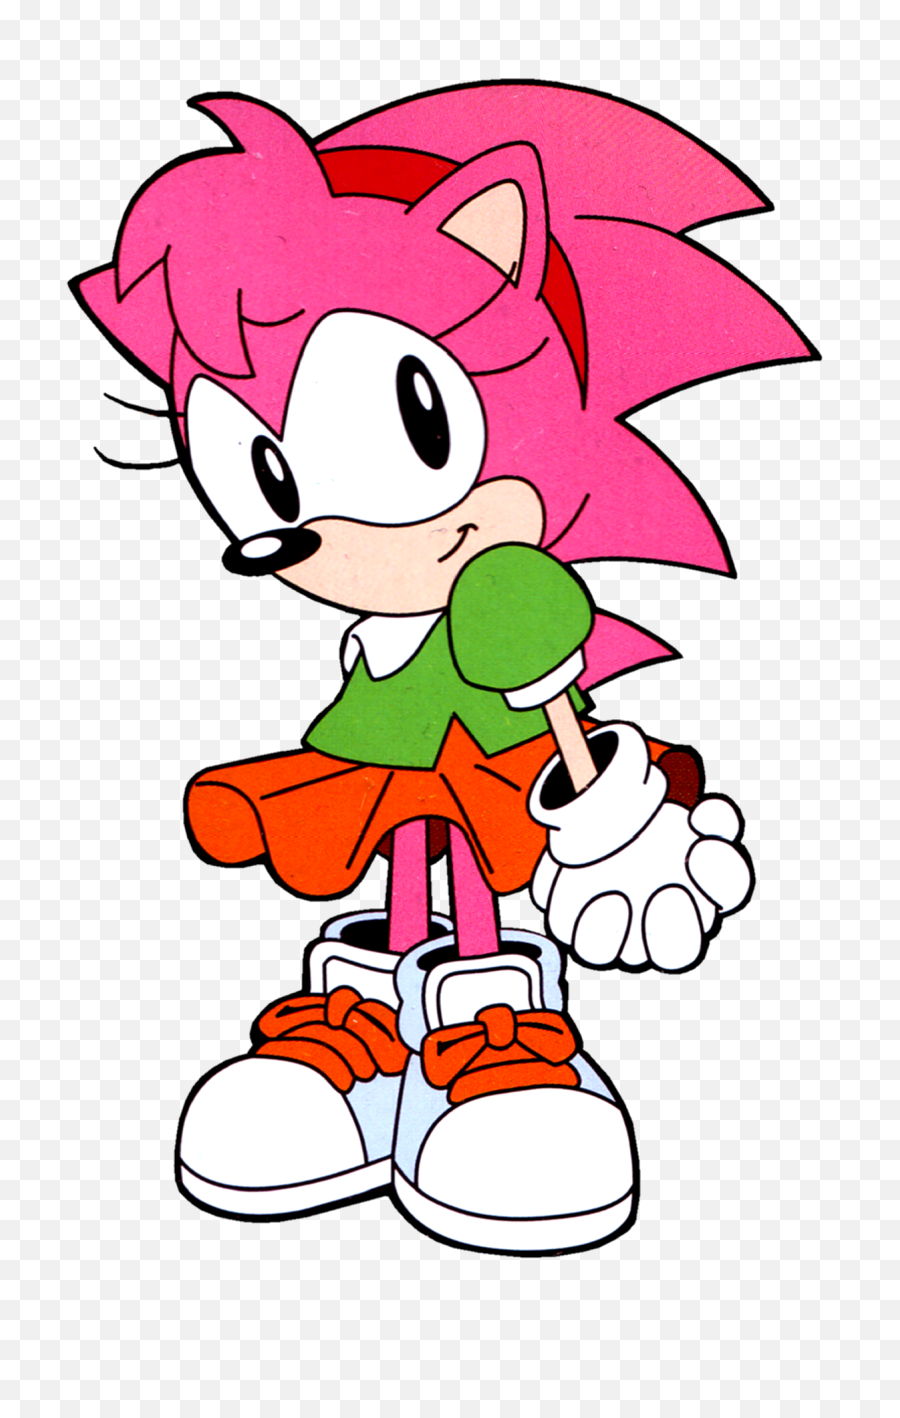 Download Hd Classic Amy Rose - Amy Rose The Rascal Png,Amy Rose Png